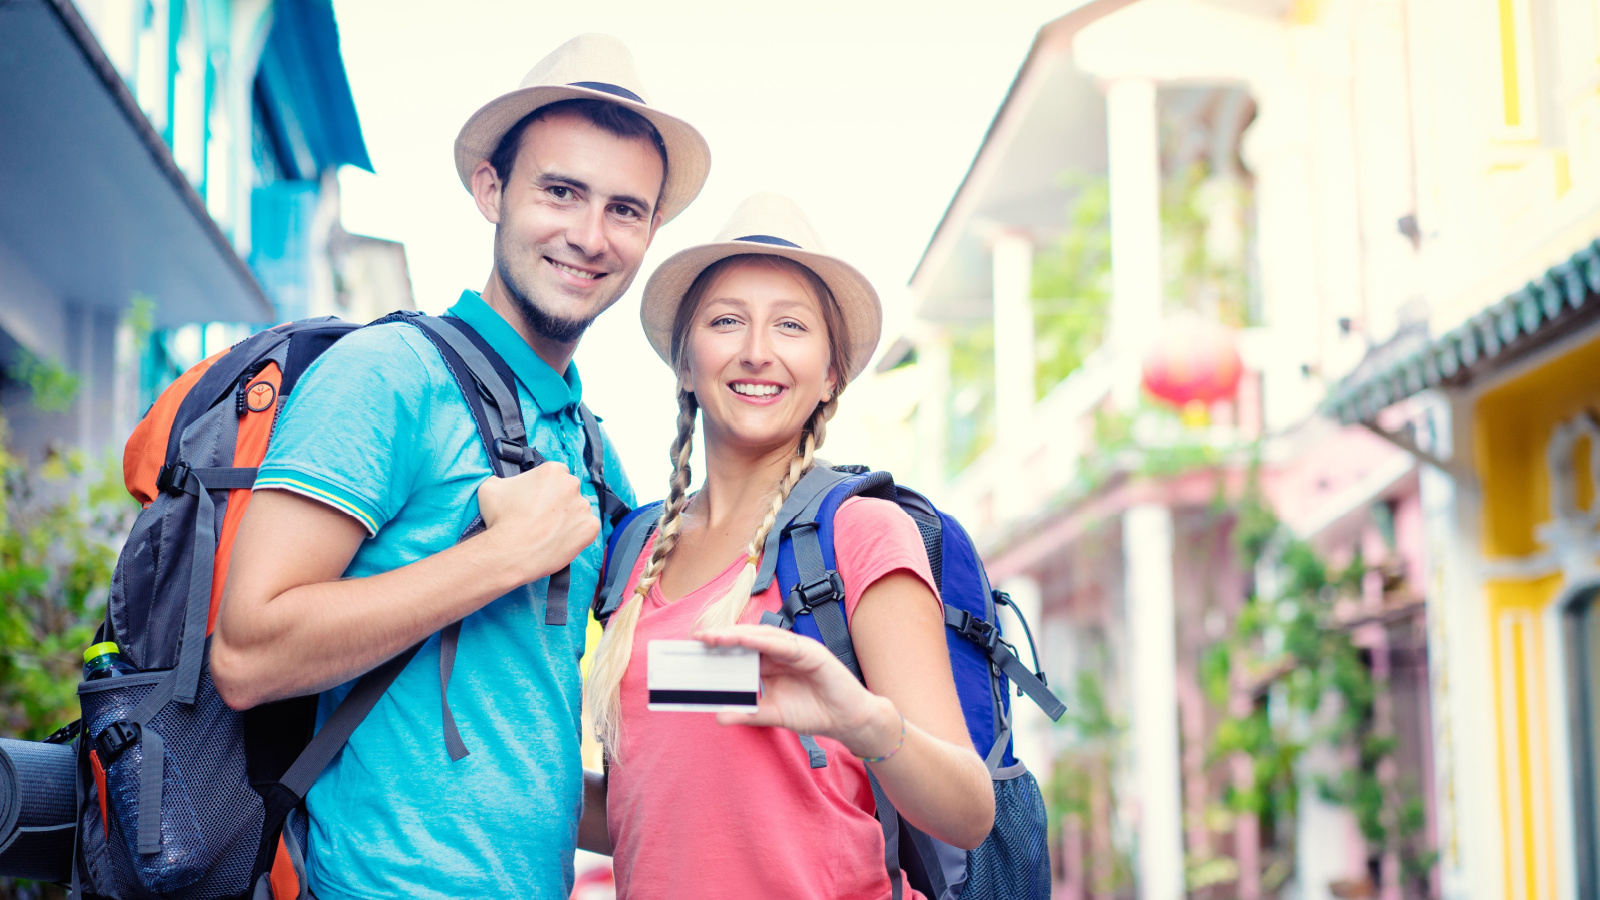 image credit: Kudla/Shutterstock <p><span>Once a month, play tourist in your own city. Visit a museum, a historical site, or a local market. These excursions provide educational and cultural experiences, fostering a deeper appreciation for your community. It’s an exciting way to learn and bond, far from the digital world.</span></p>